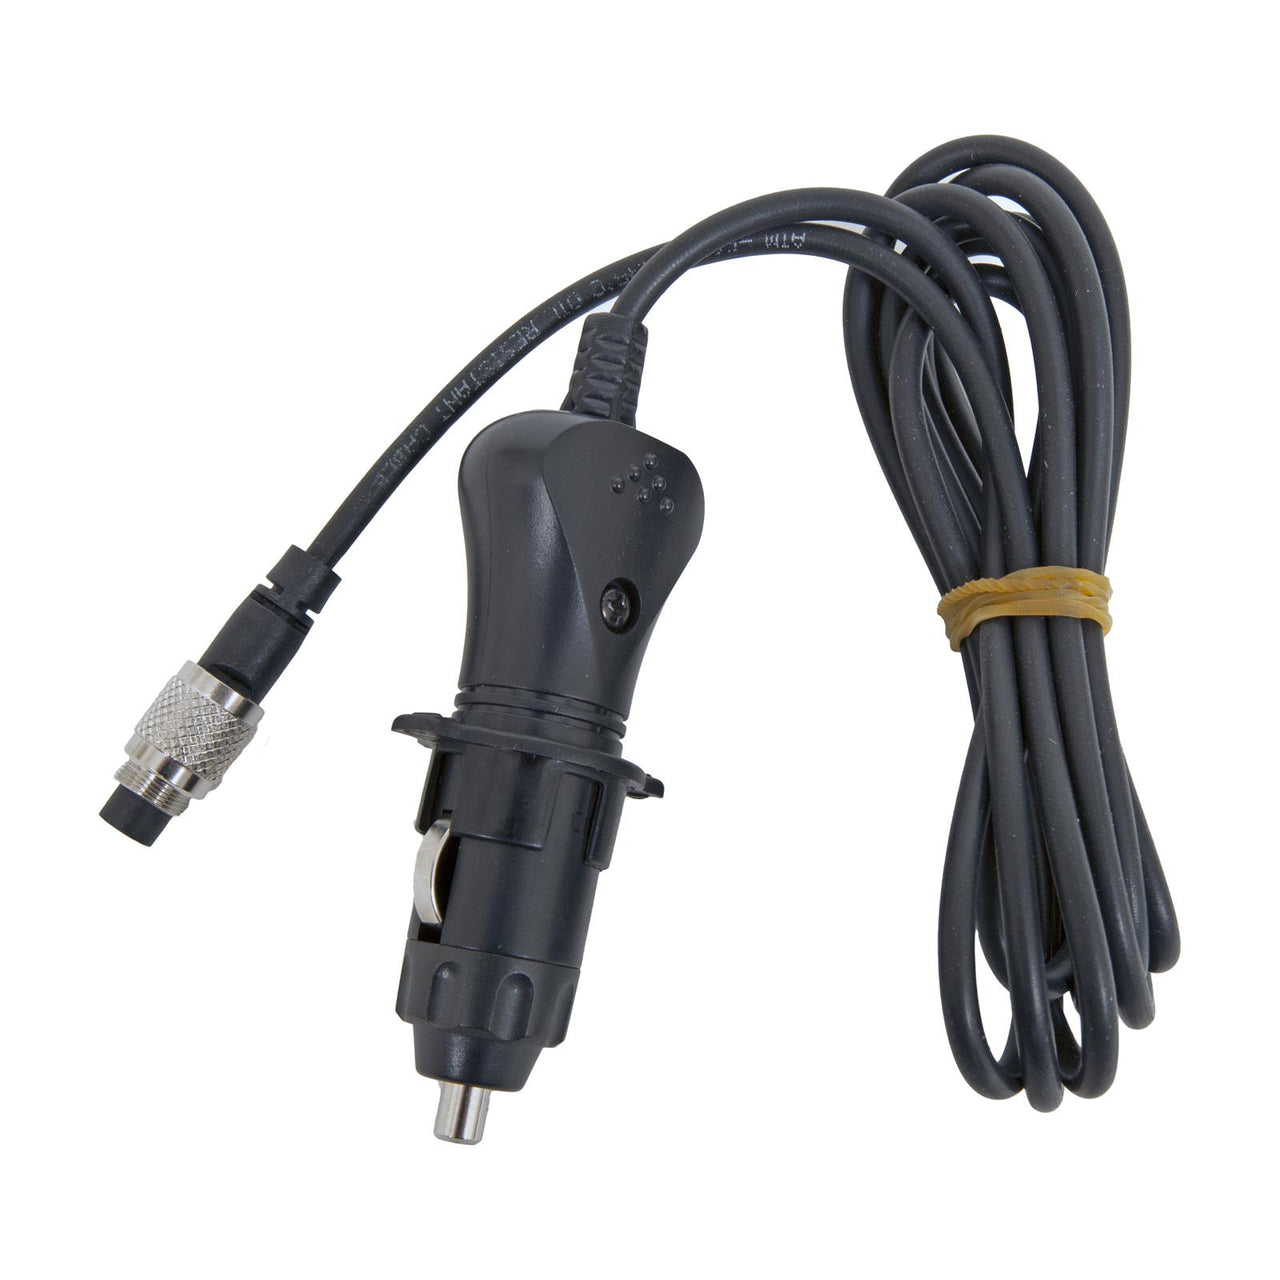 AiM 5-Pin 712 to DC (Lighter Plug) Cable for Solo2/Solo2DL